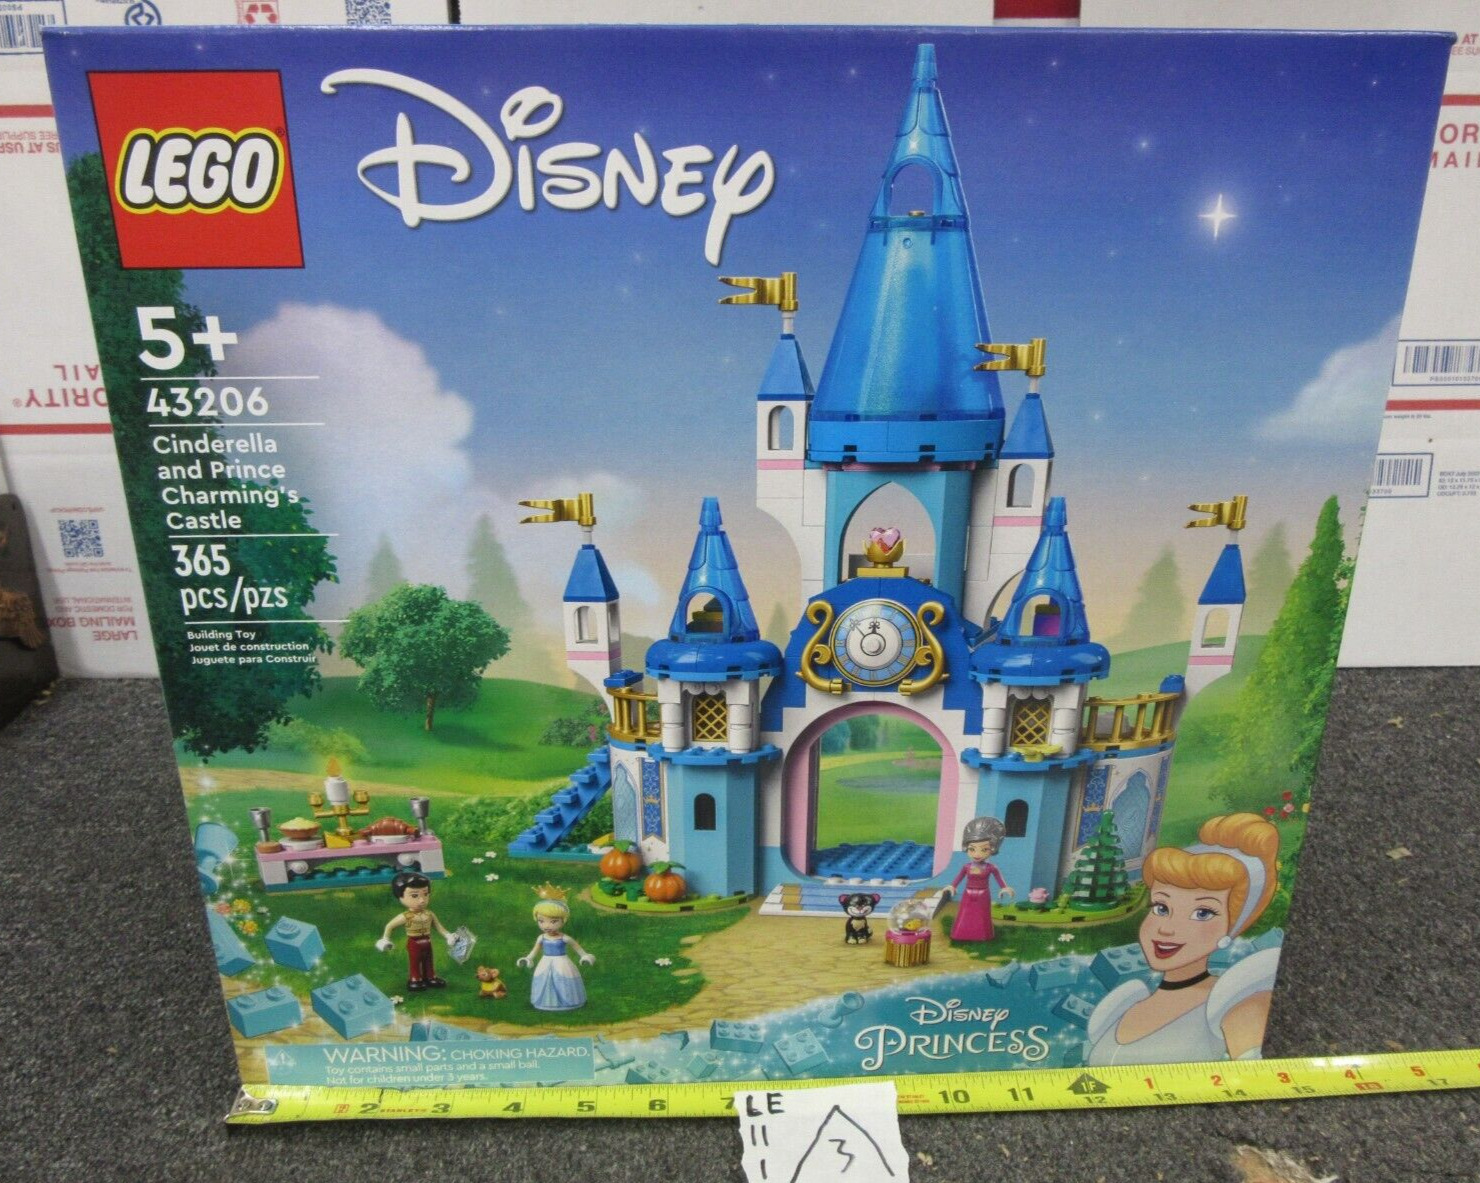 NEW LEGO 43206 Disney Cinderella and Prince Charming's Castle Set with Figures